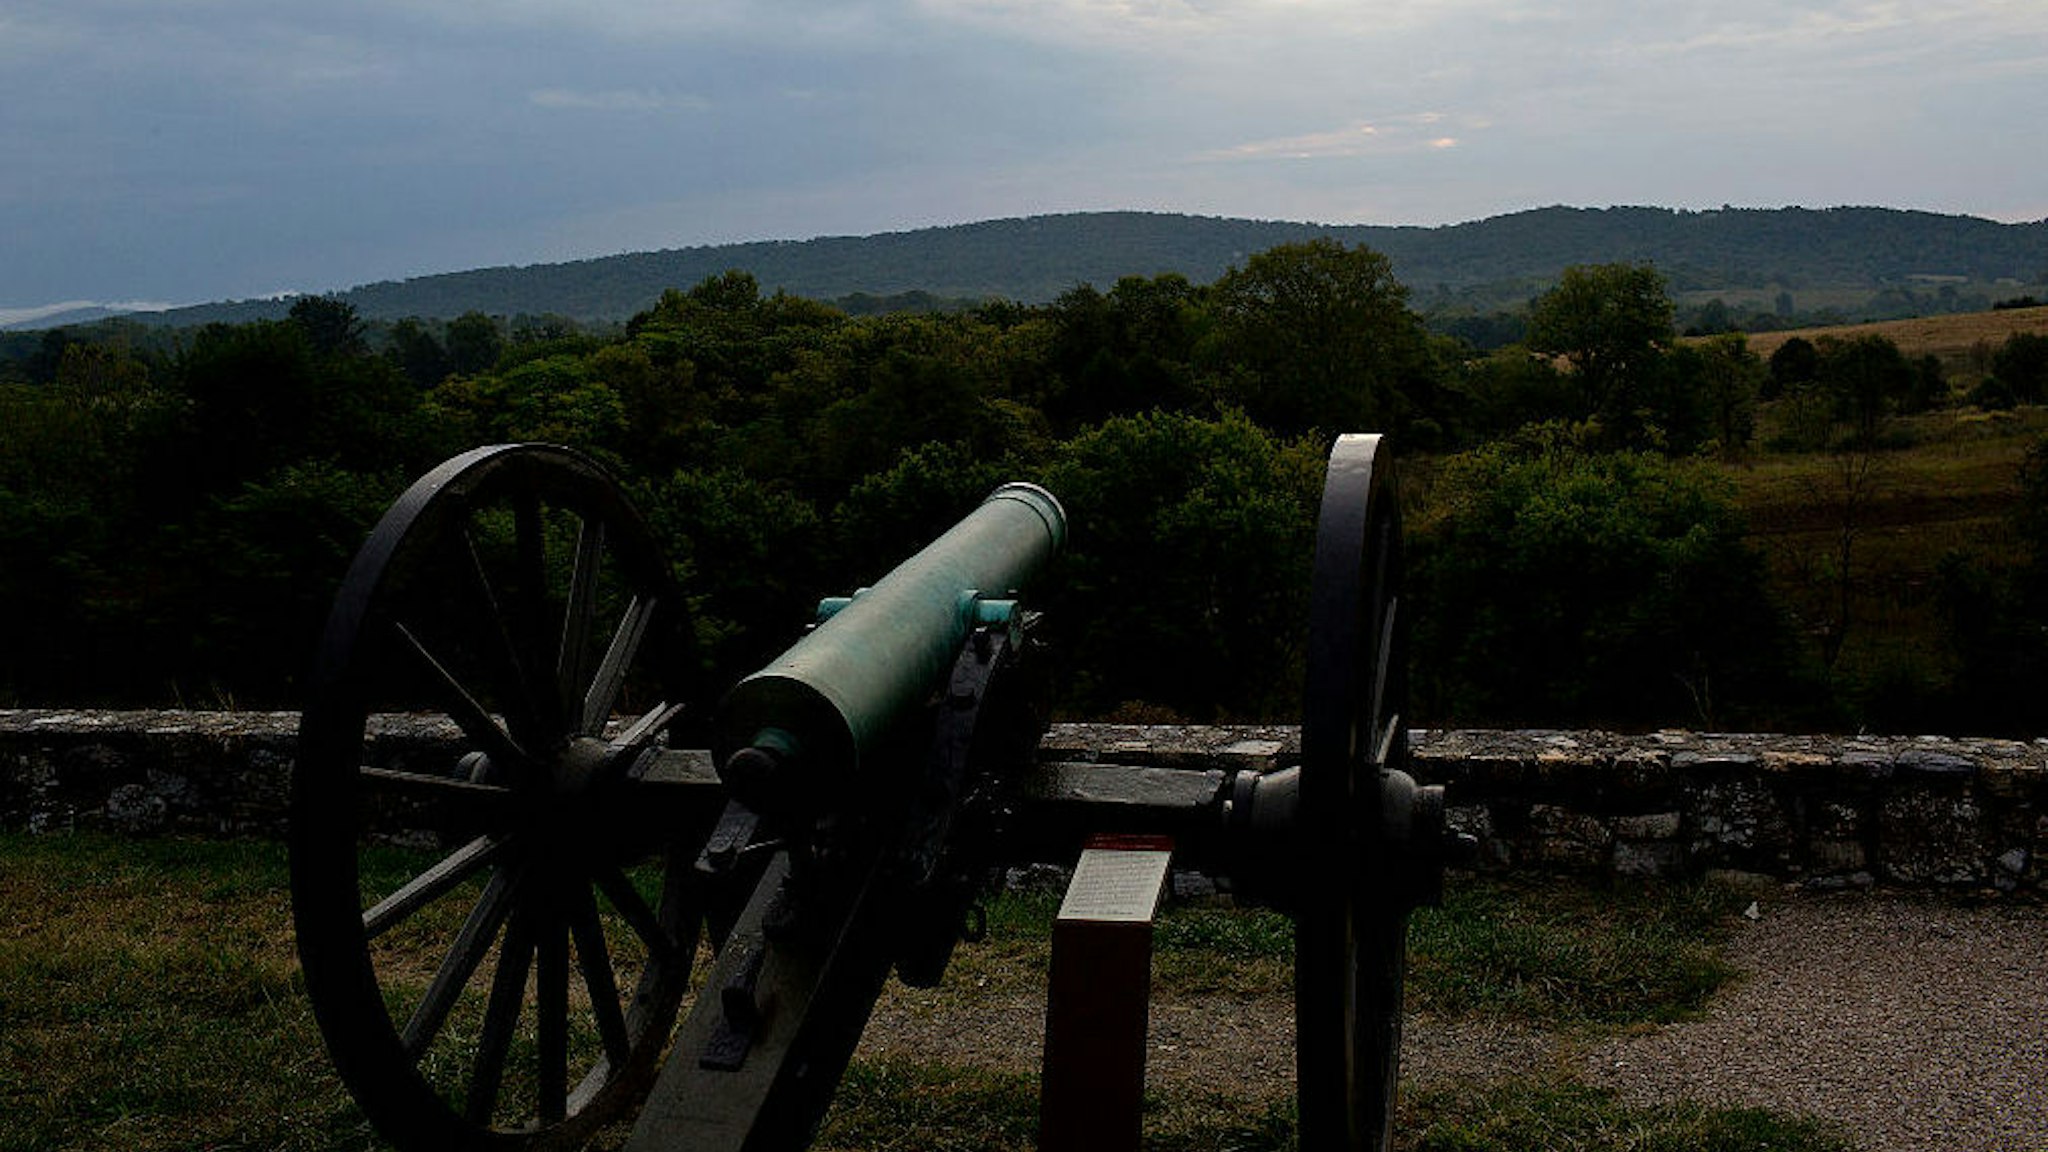 A cannon overlooks the ridge at the Antietam battlefield where Union troops under the command of General Burnside crossed a creek and climbed the hill below in an atack on the Confederate lines in 1862, September 18, 2016. (Photo by Andrew Lichtenstein/Corbis via Getty Images)